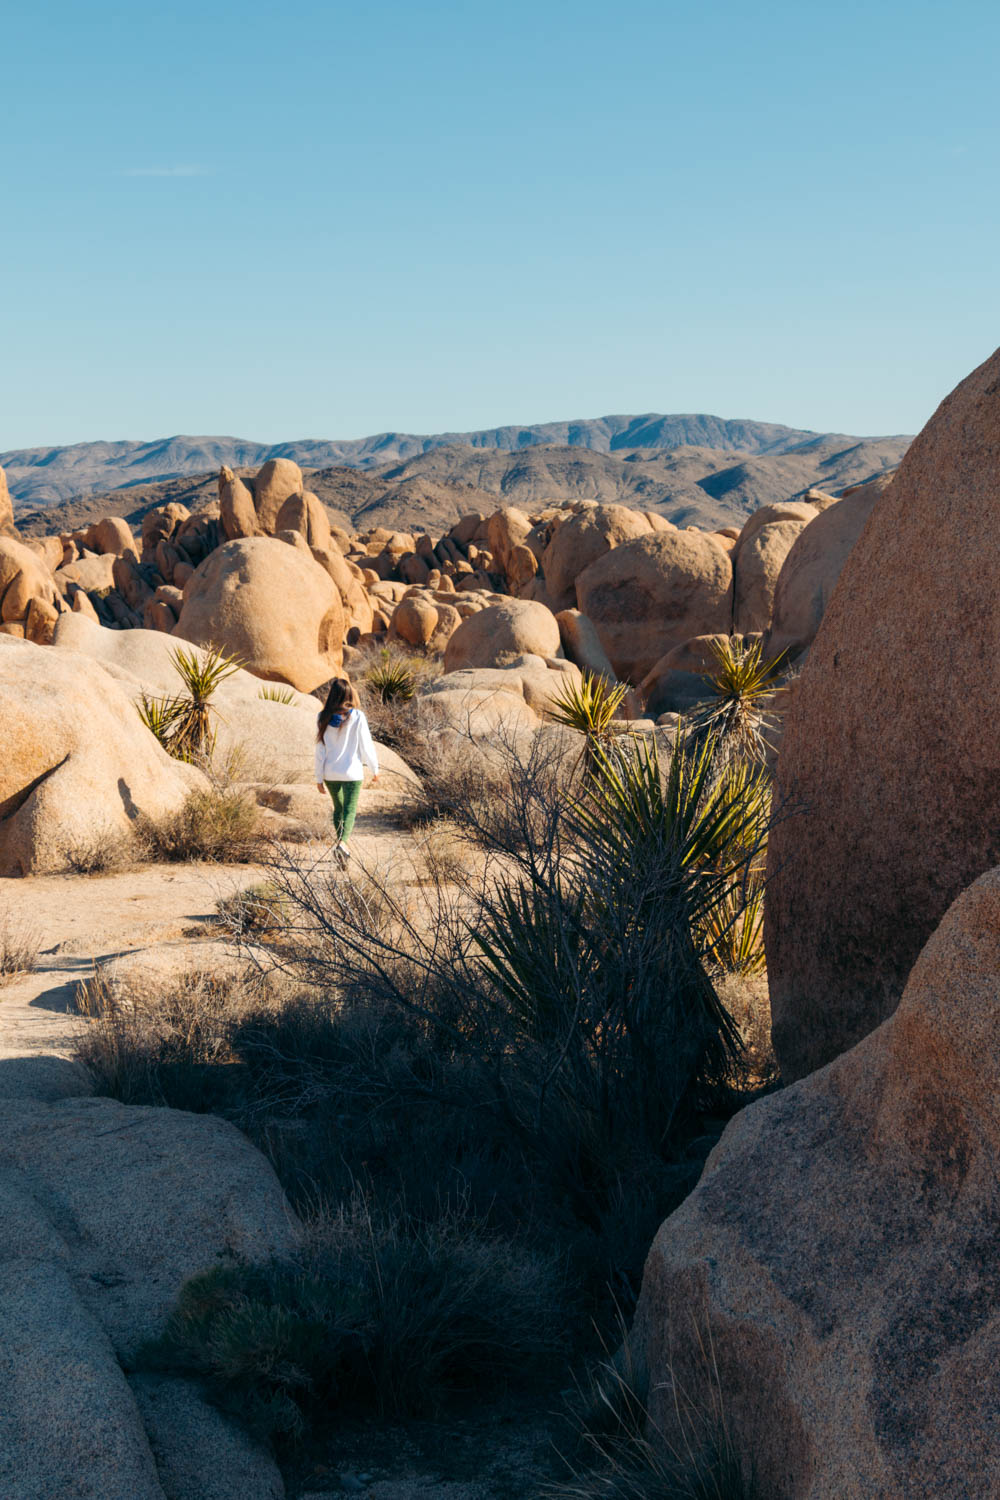 Weekend (1-2 Days) in Joshua Tree National Park - Roads and Destinations